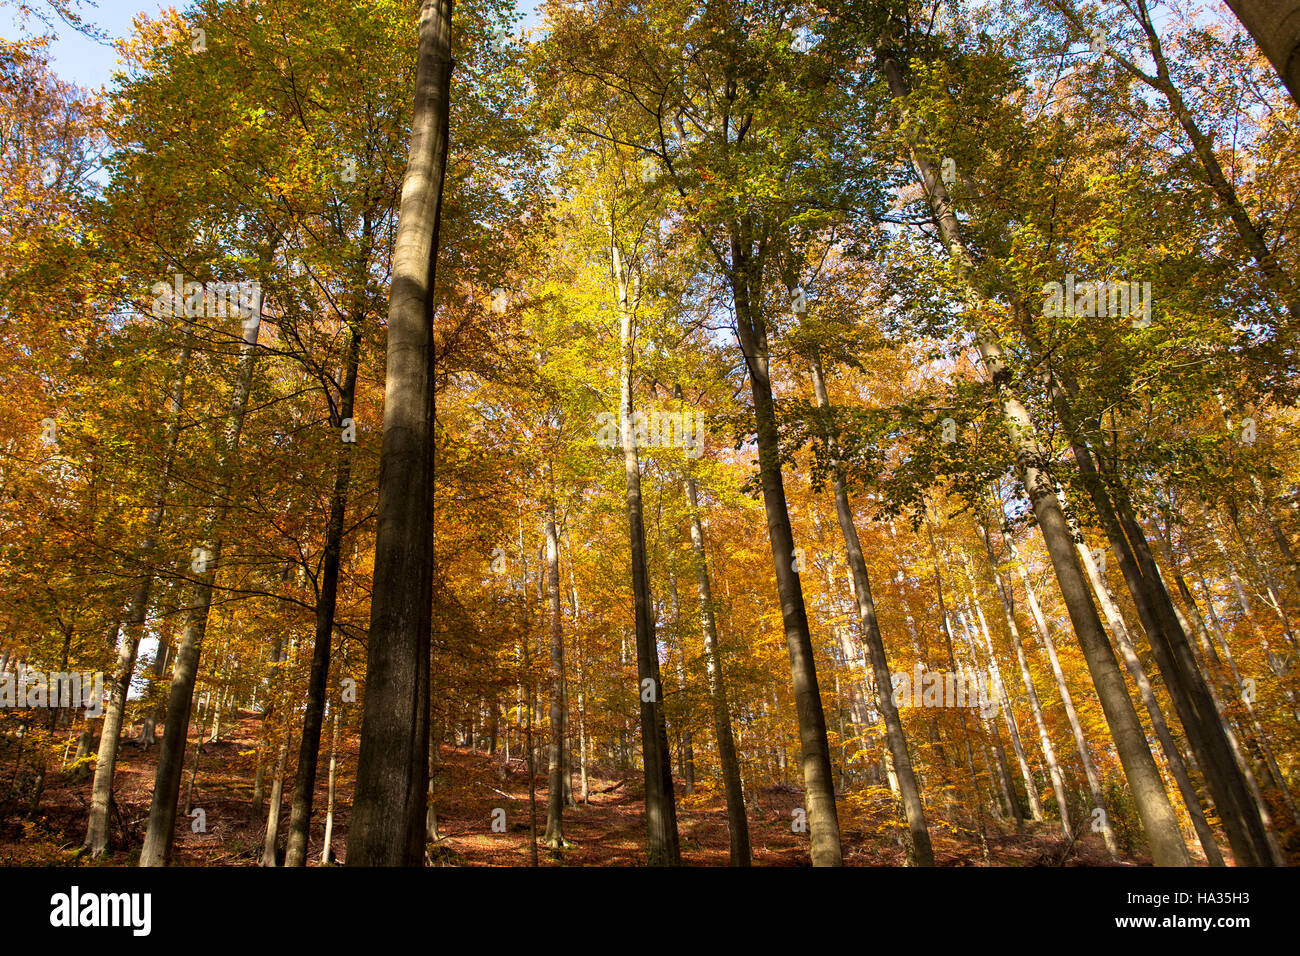 Europe, Germany, North Rhine-Westphalia, forest in autumn, beech trees Stock Photo